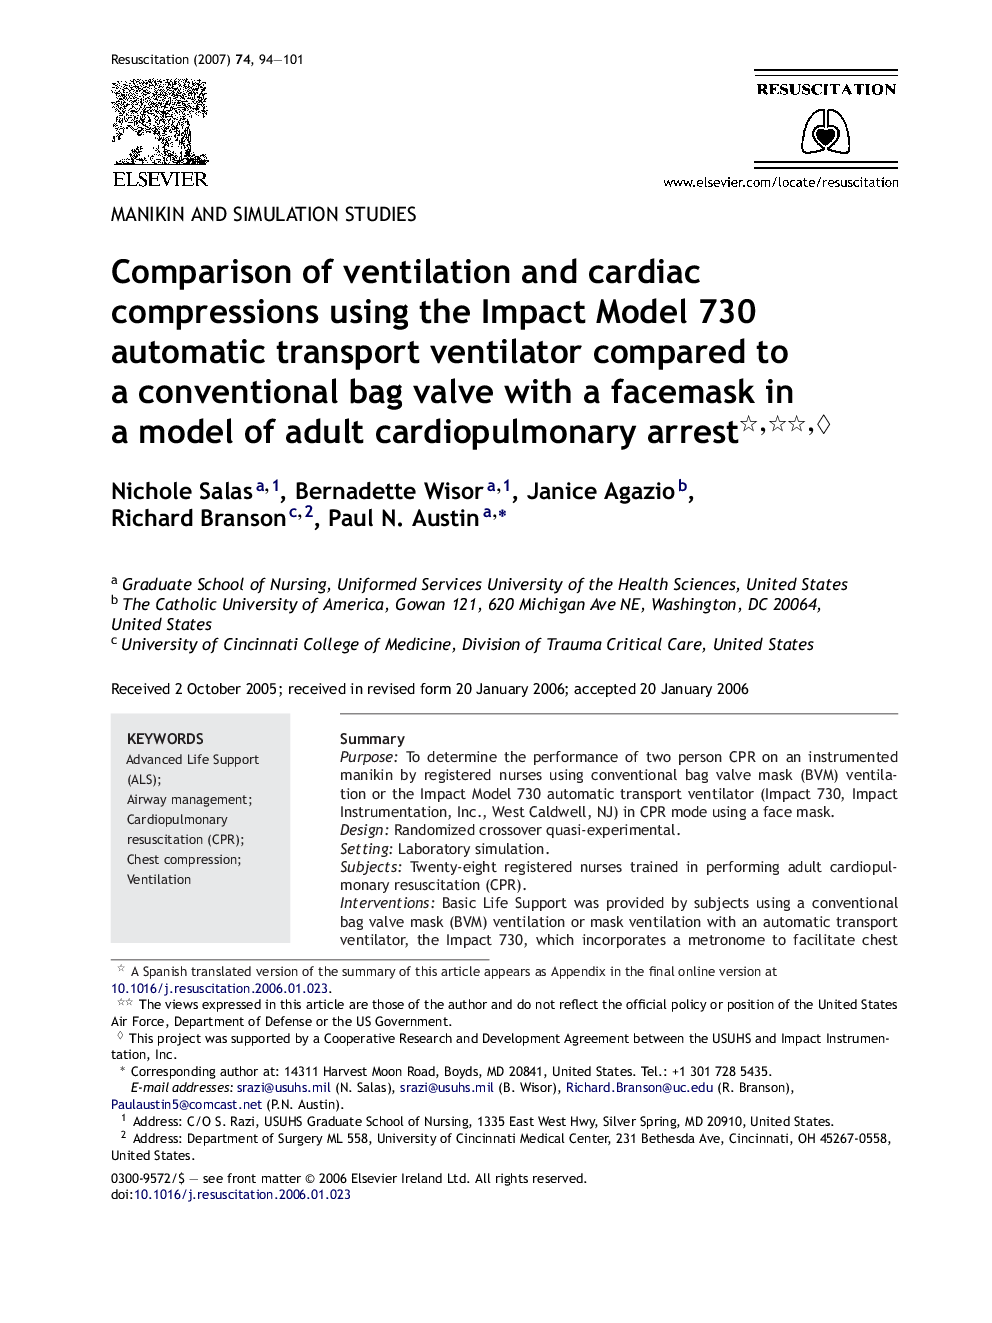 Comparison of ventilation and cardiac compressions using the Impact Model 730 automatic transport ventilator compared to a conventional bag valve with a facemask in a model of adult cardiopulmonary arrest ◊